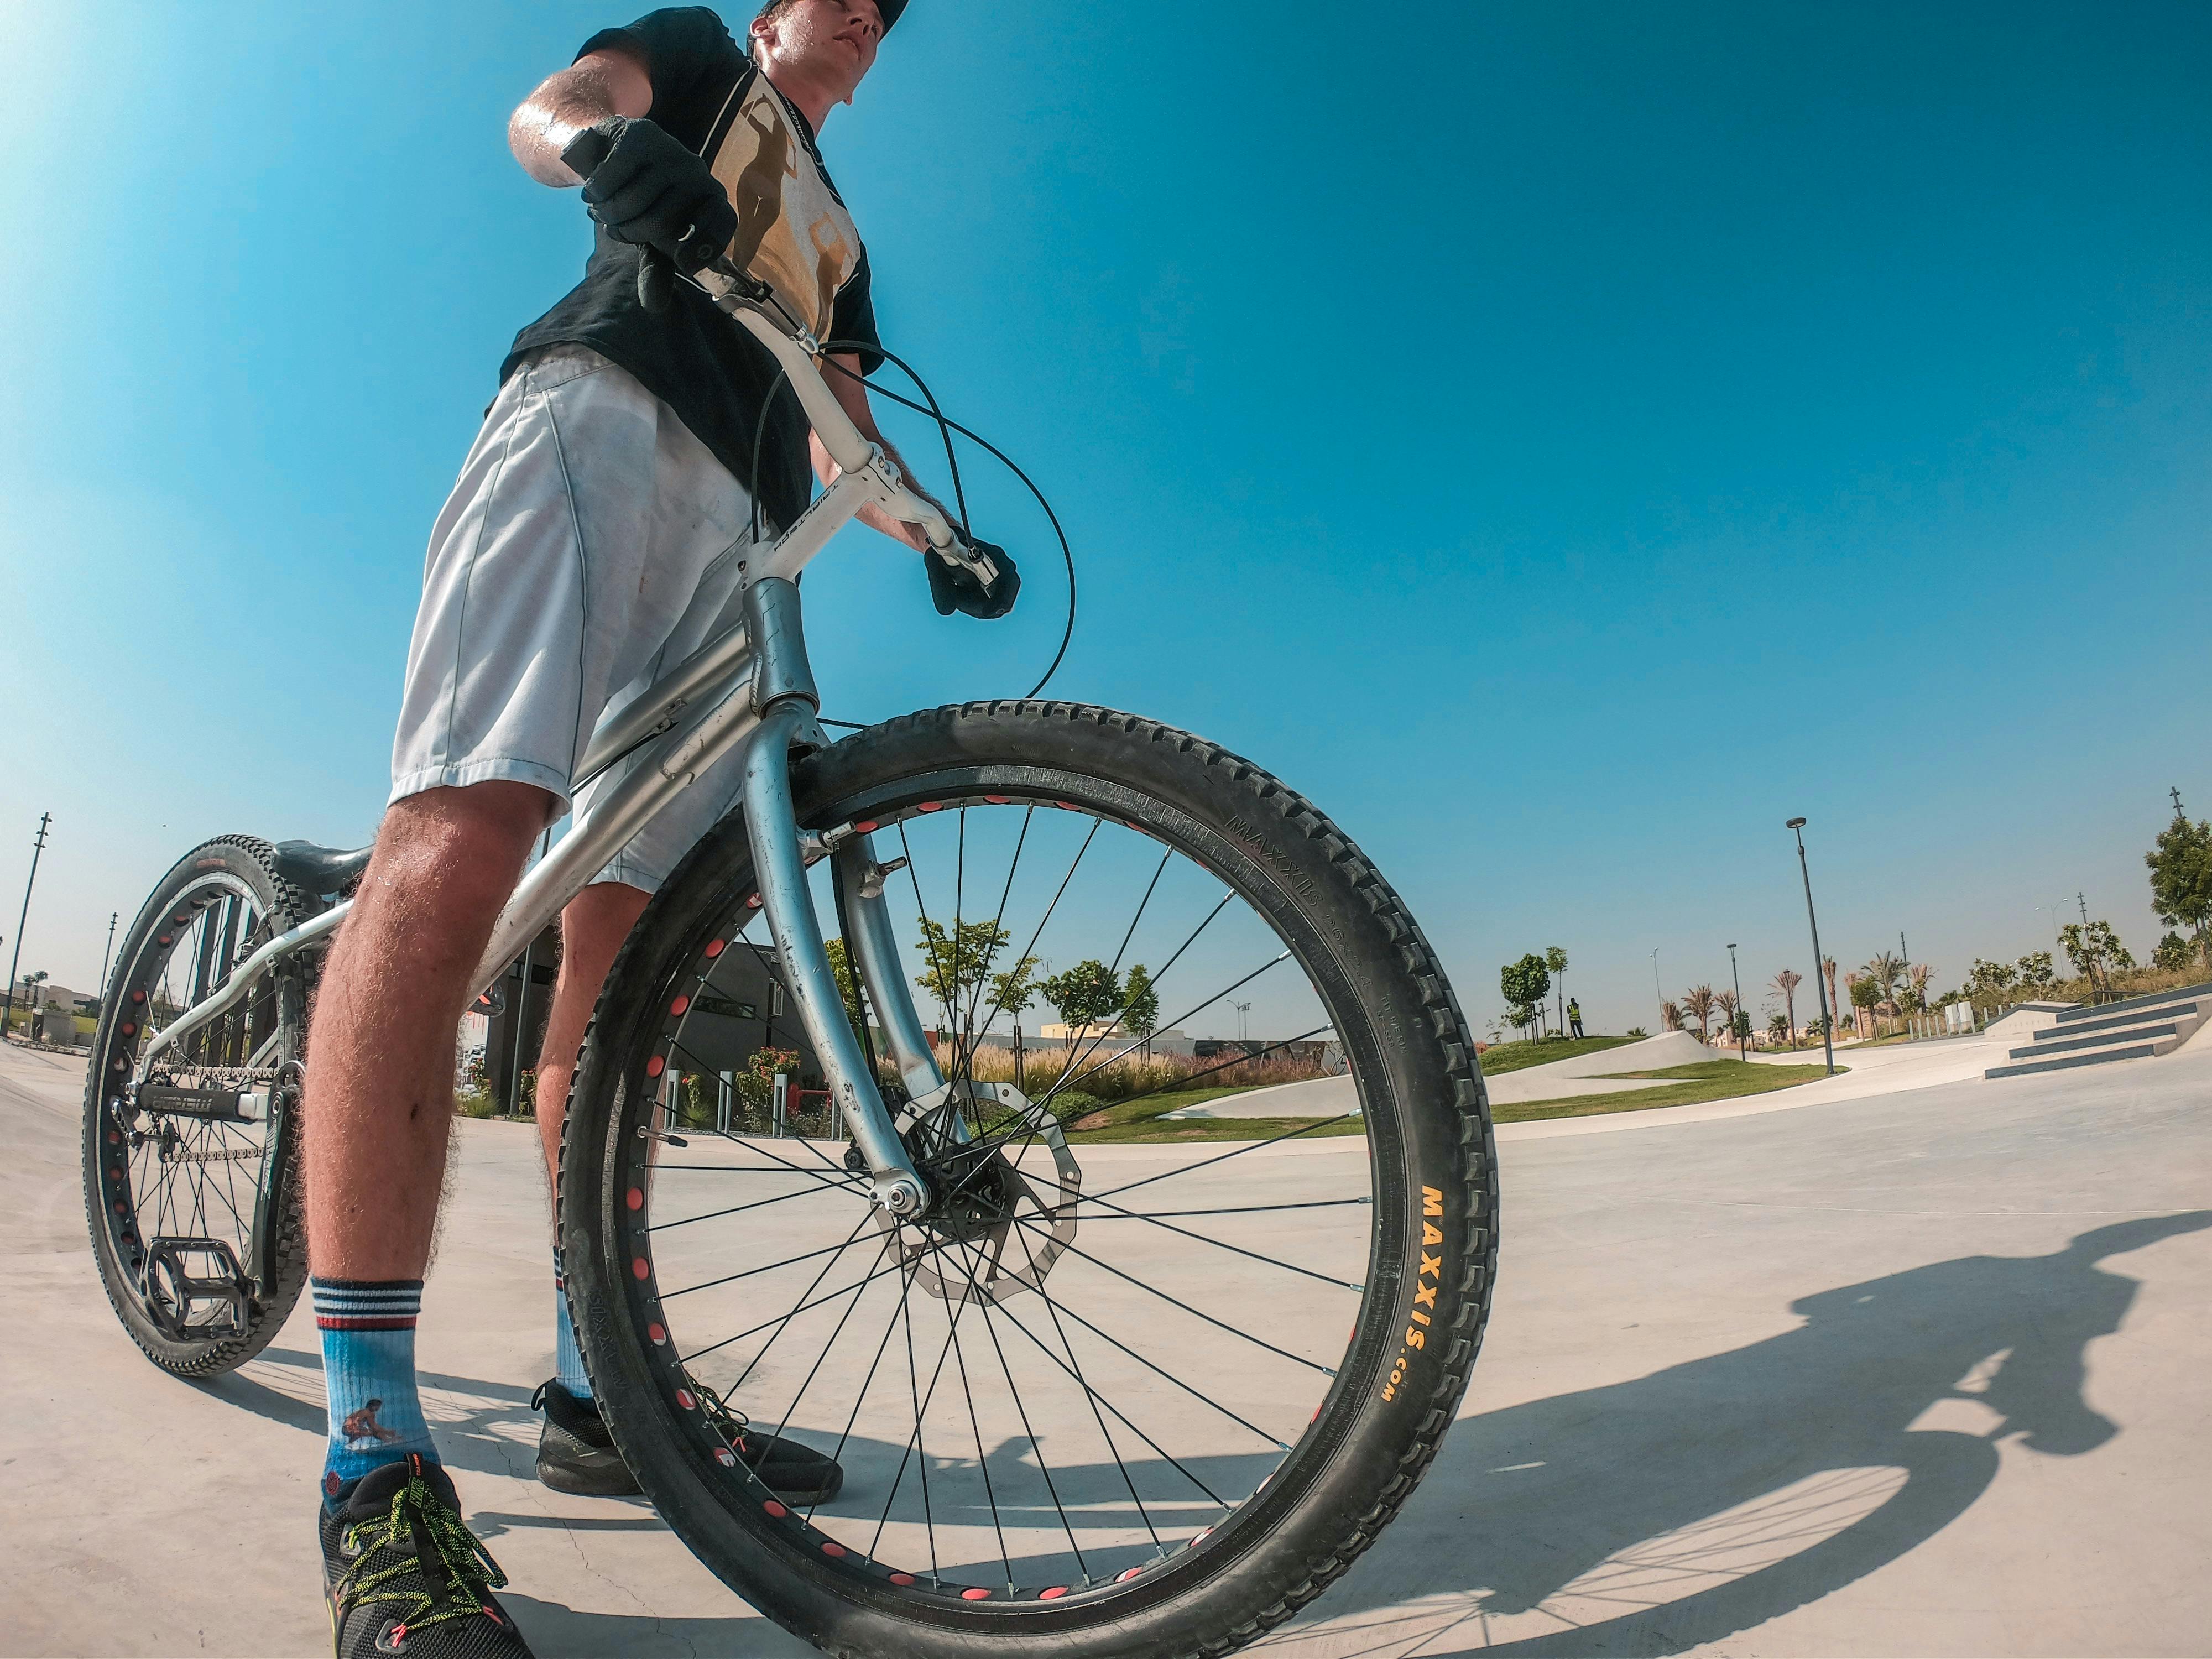 Low Angle Photography of a Man Holding Bike